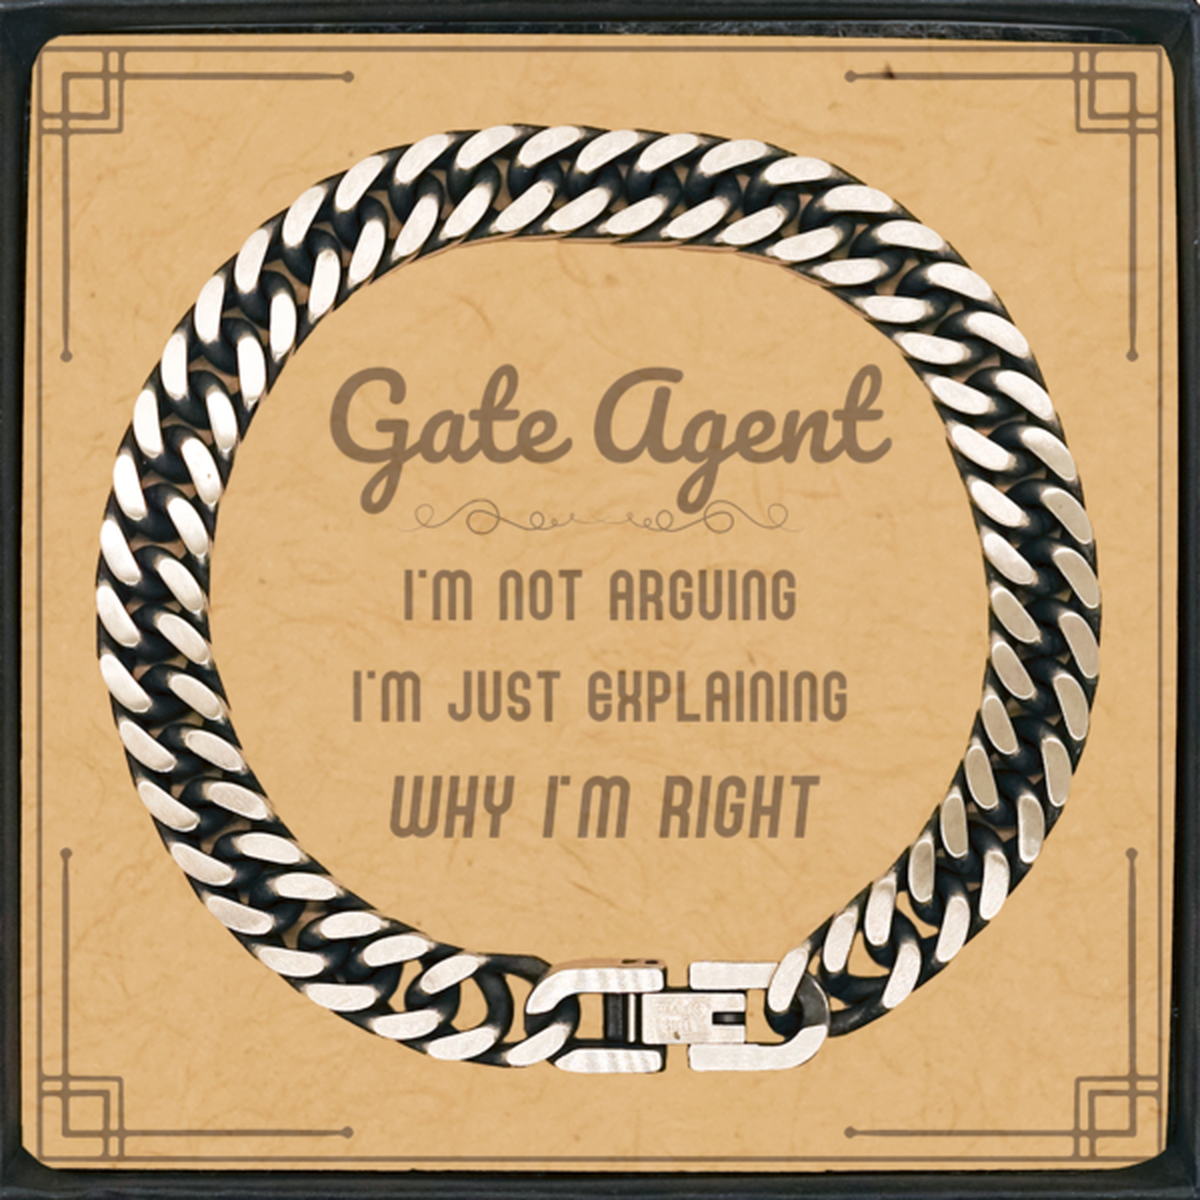 Gate Agent I'm not Arguing. I'm Just Explaining Why I'm RIGHT Cuban Link Chain Bracelet, Funny Saying Quote Gate Agent Gifts For Gate Agent Message Card Graduation Birthday Christmas Gifts for Men Women Coworker